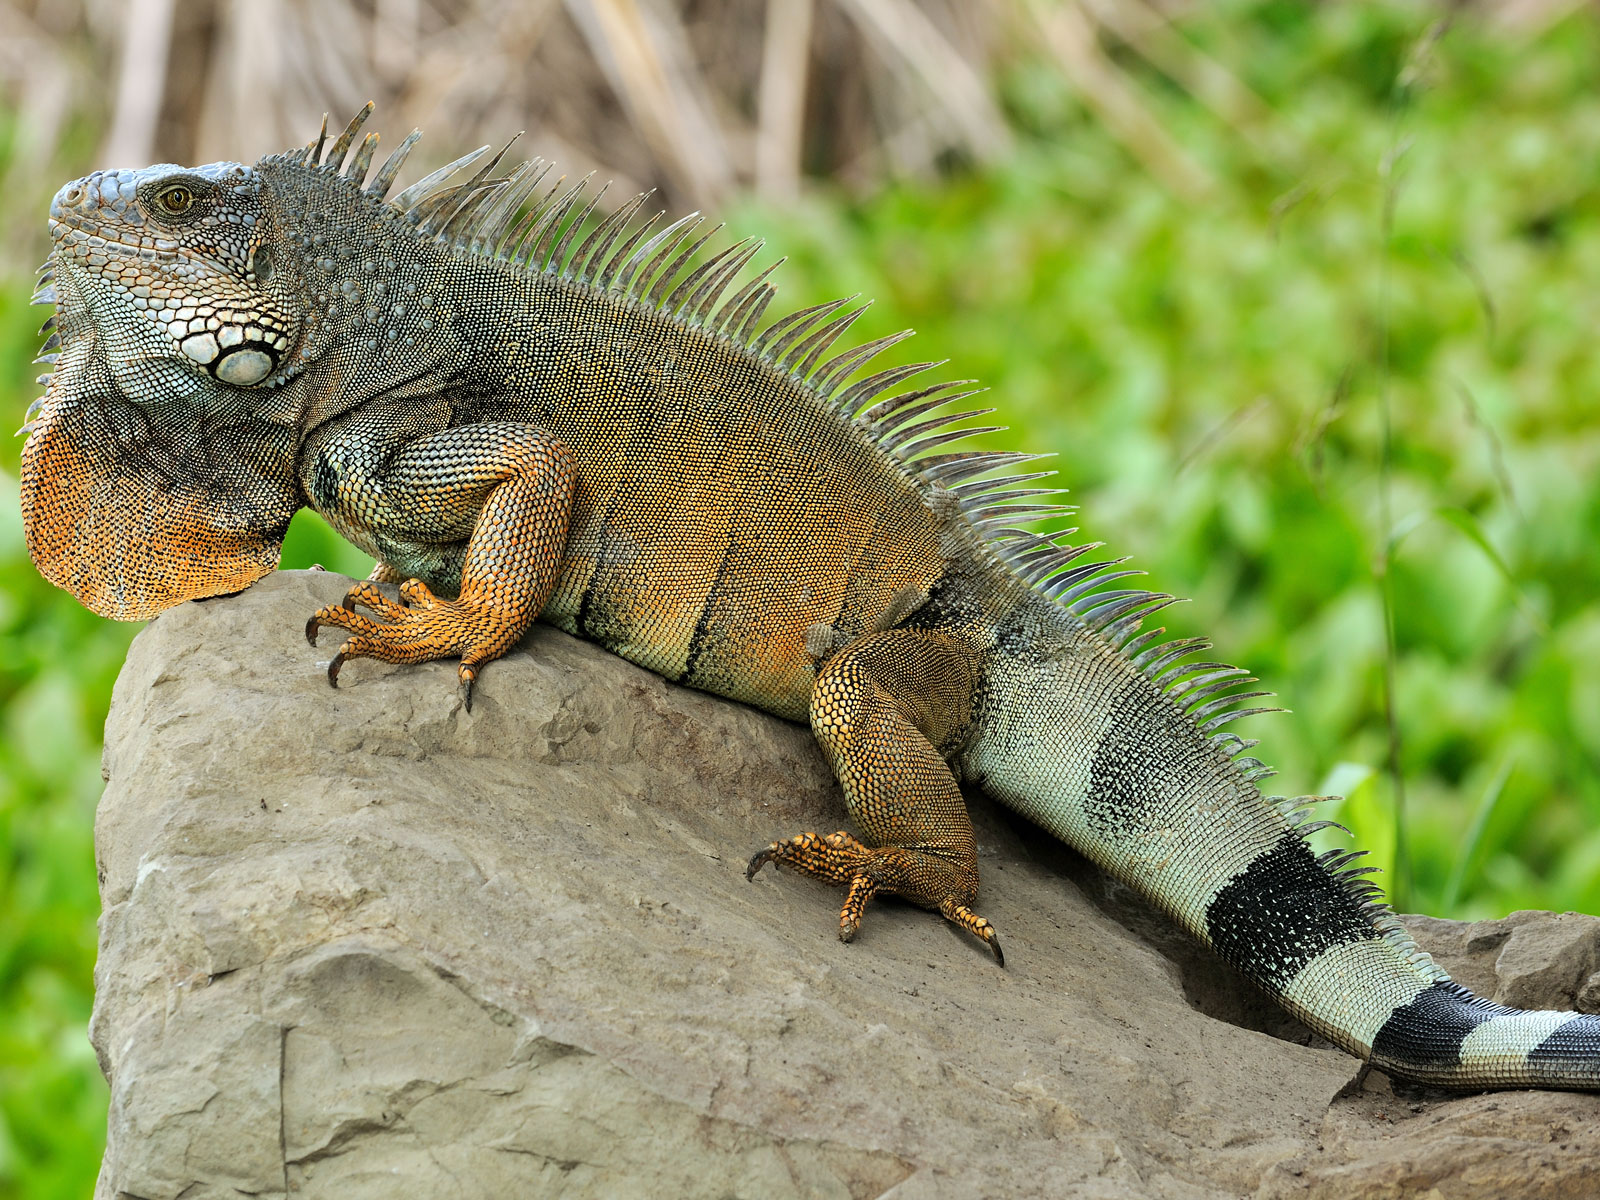 Iguana Facts And Truth